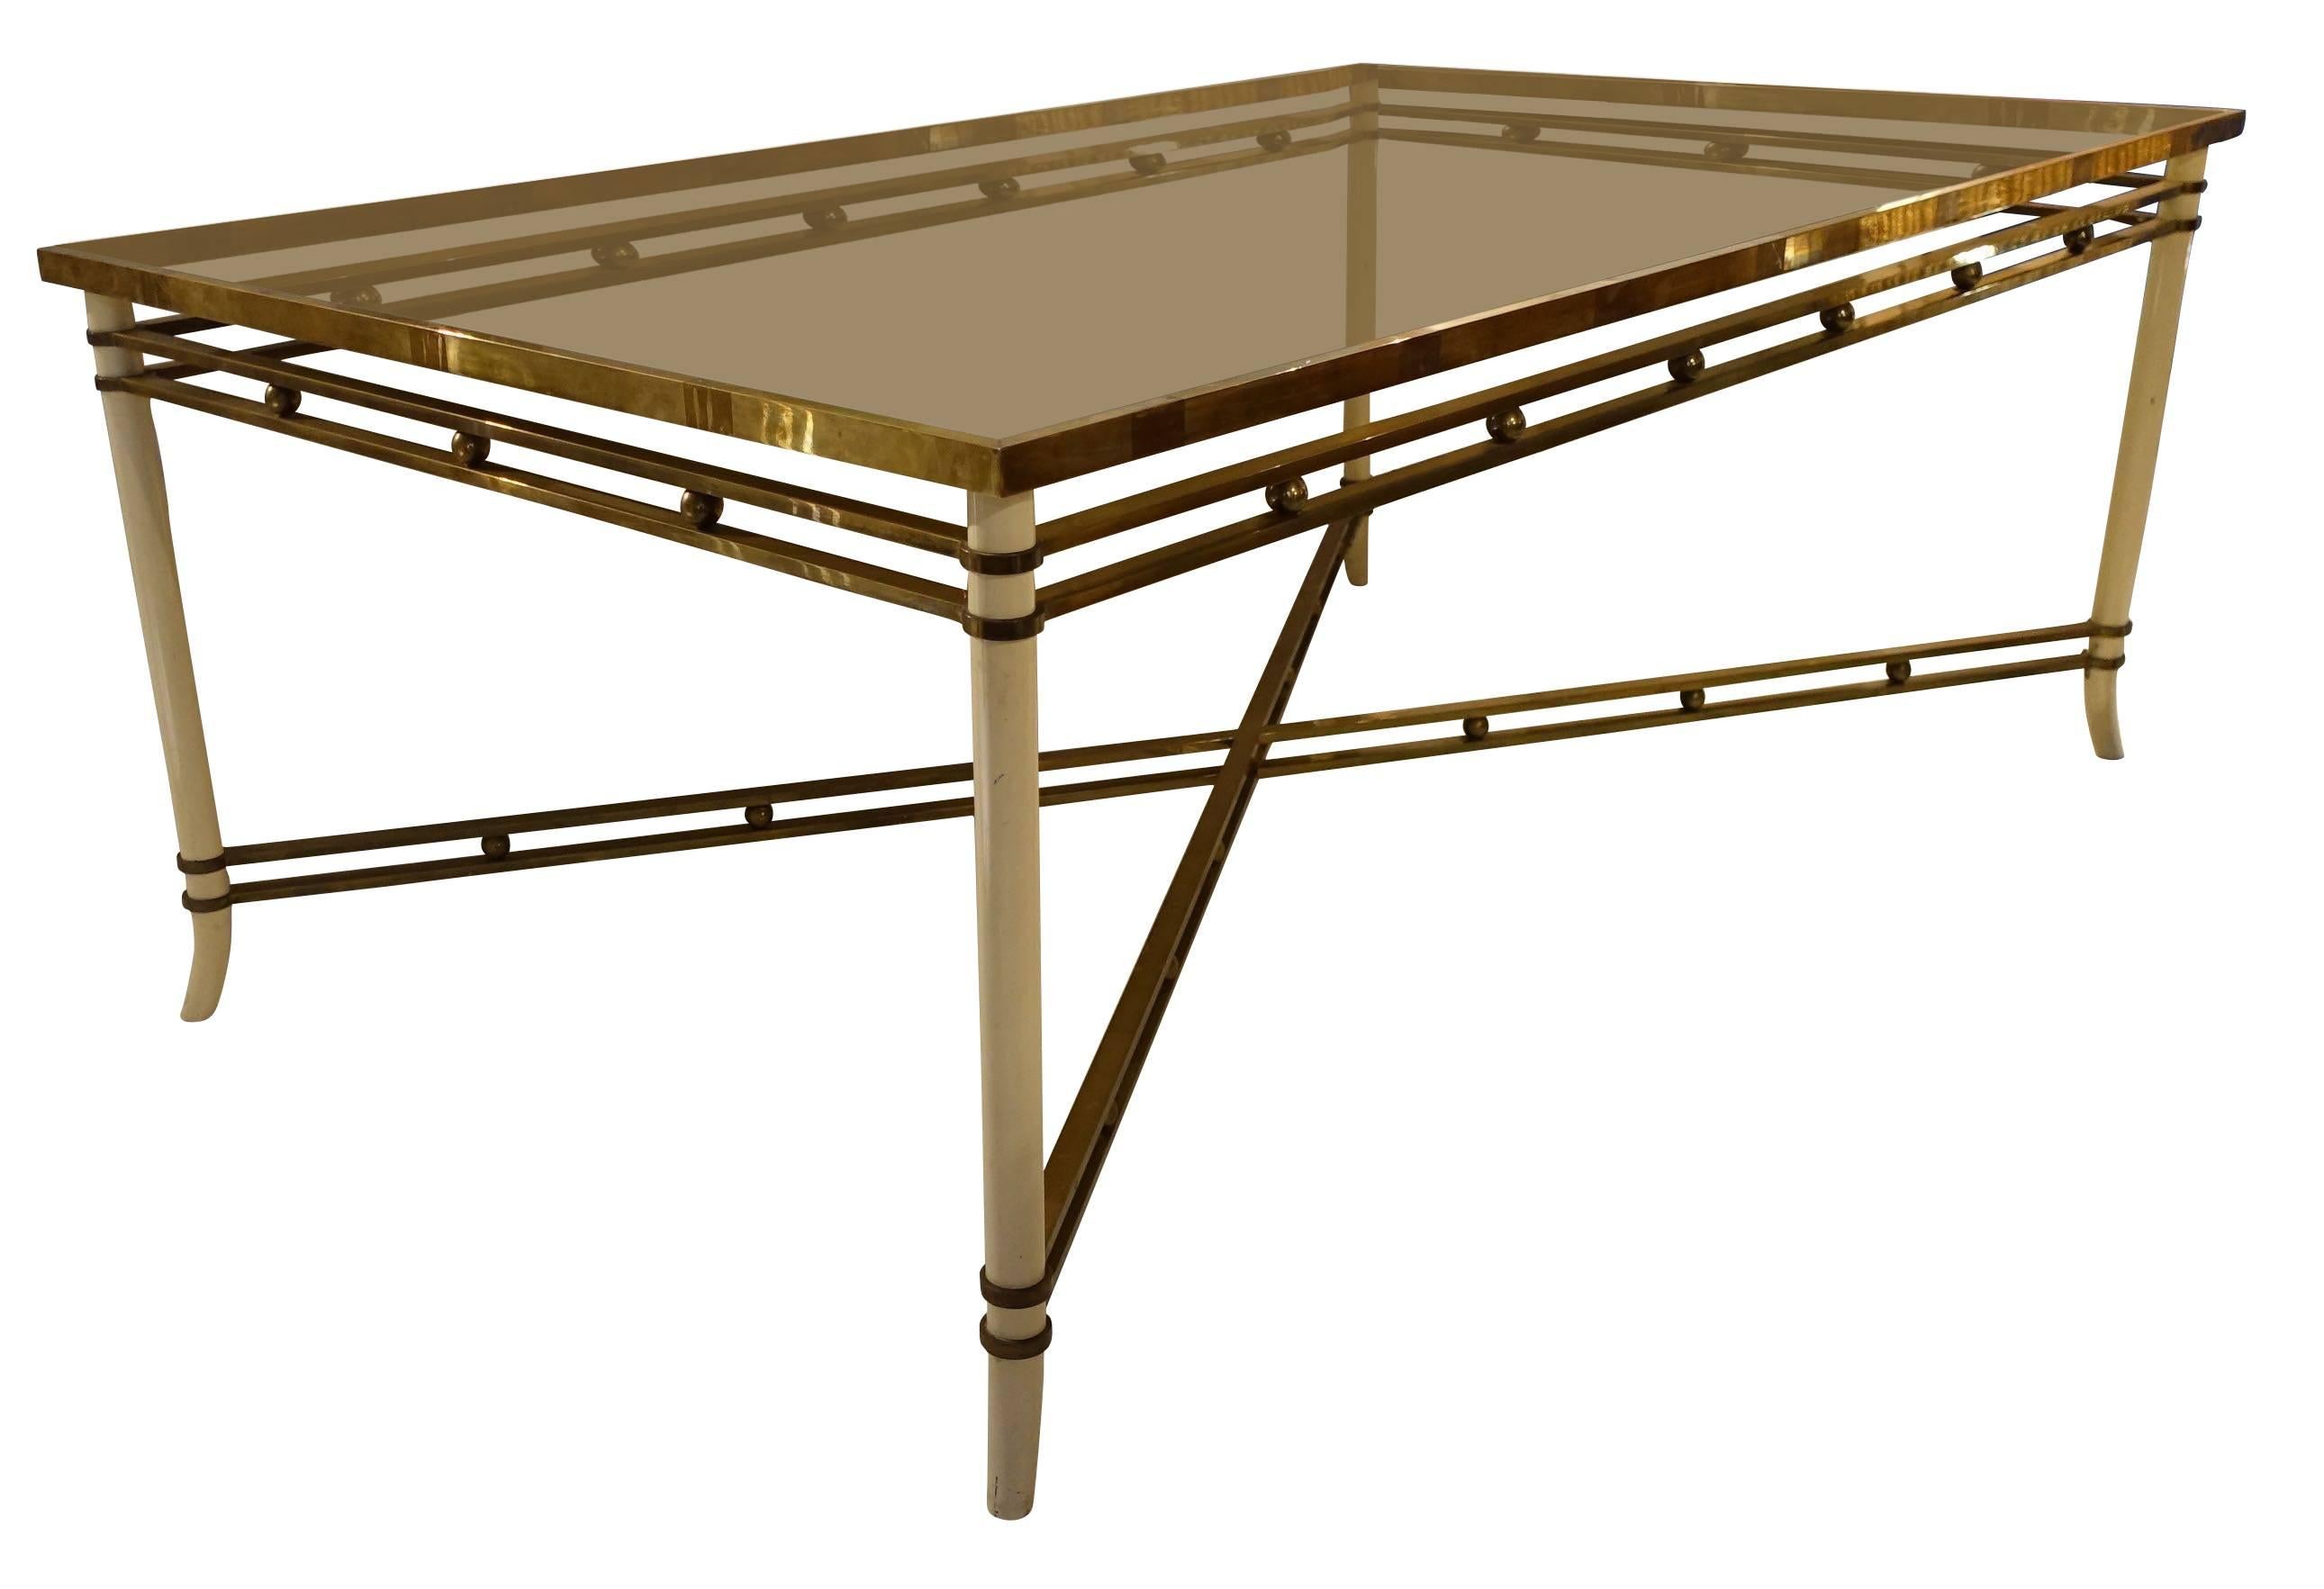 Midcentury French cream colored metal legs with brass details.
Smoked taupe glass top.
Decorative small brass balls placed along apron as well as cross stretcher of table.